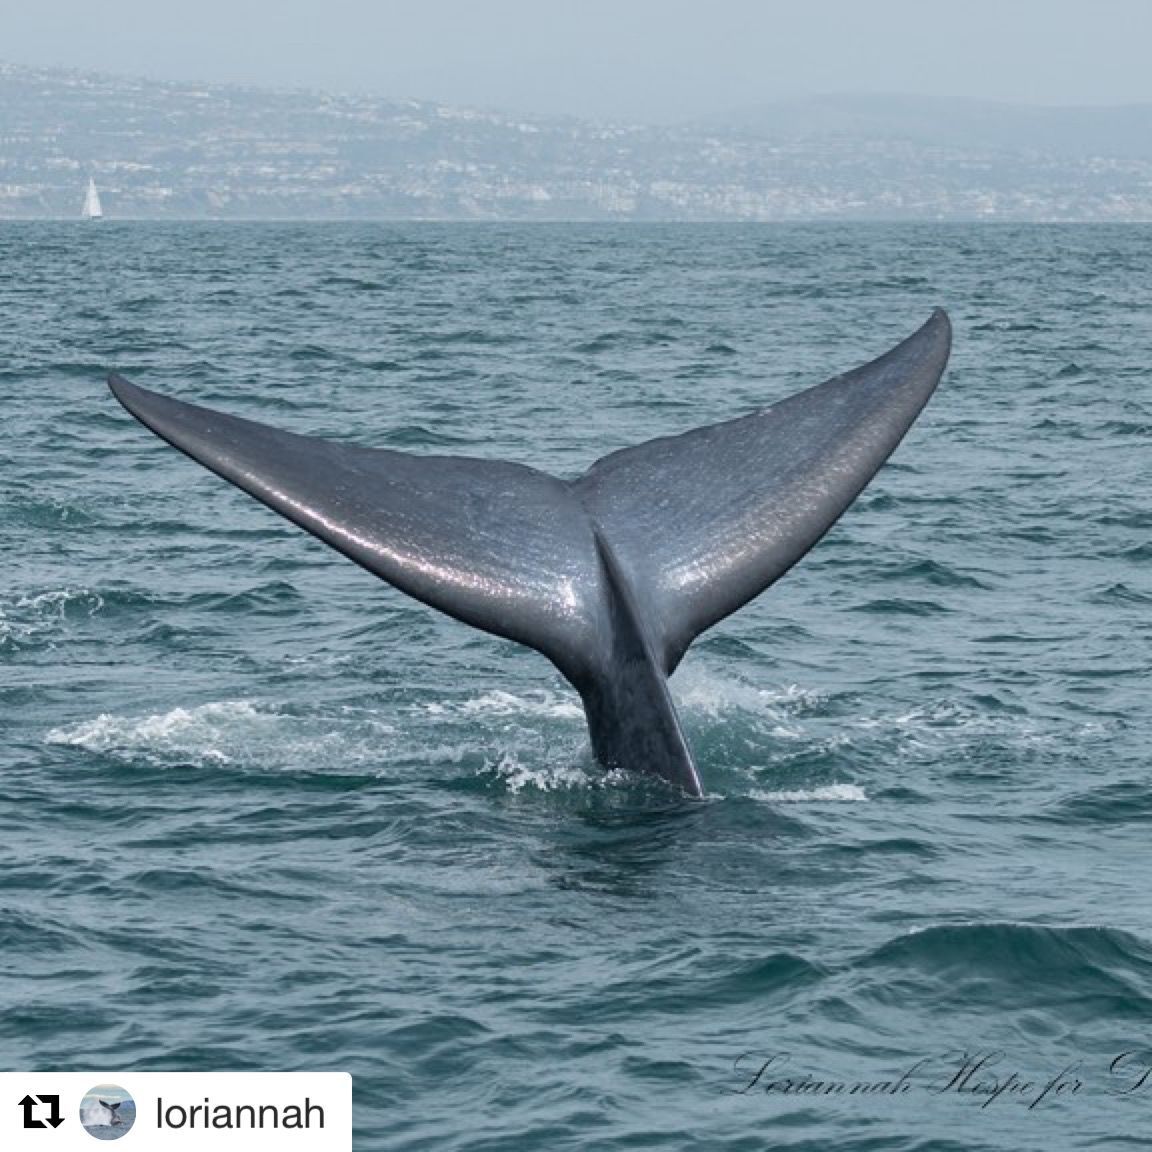 A Beautiful Blue Whale. Read the full story here: buff.ly/2YYoujS
Photo by Loriannah
This is an encounter from 2019
#WhaleTales